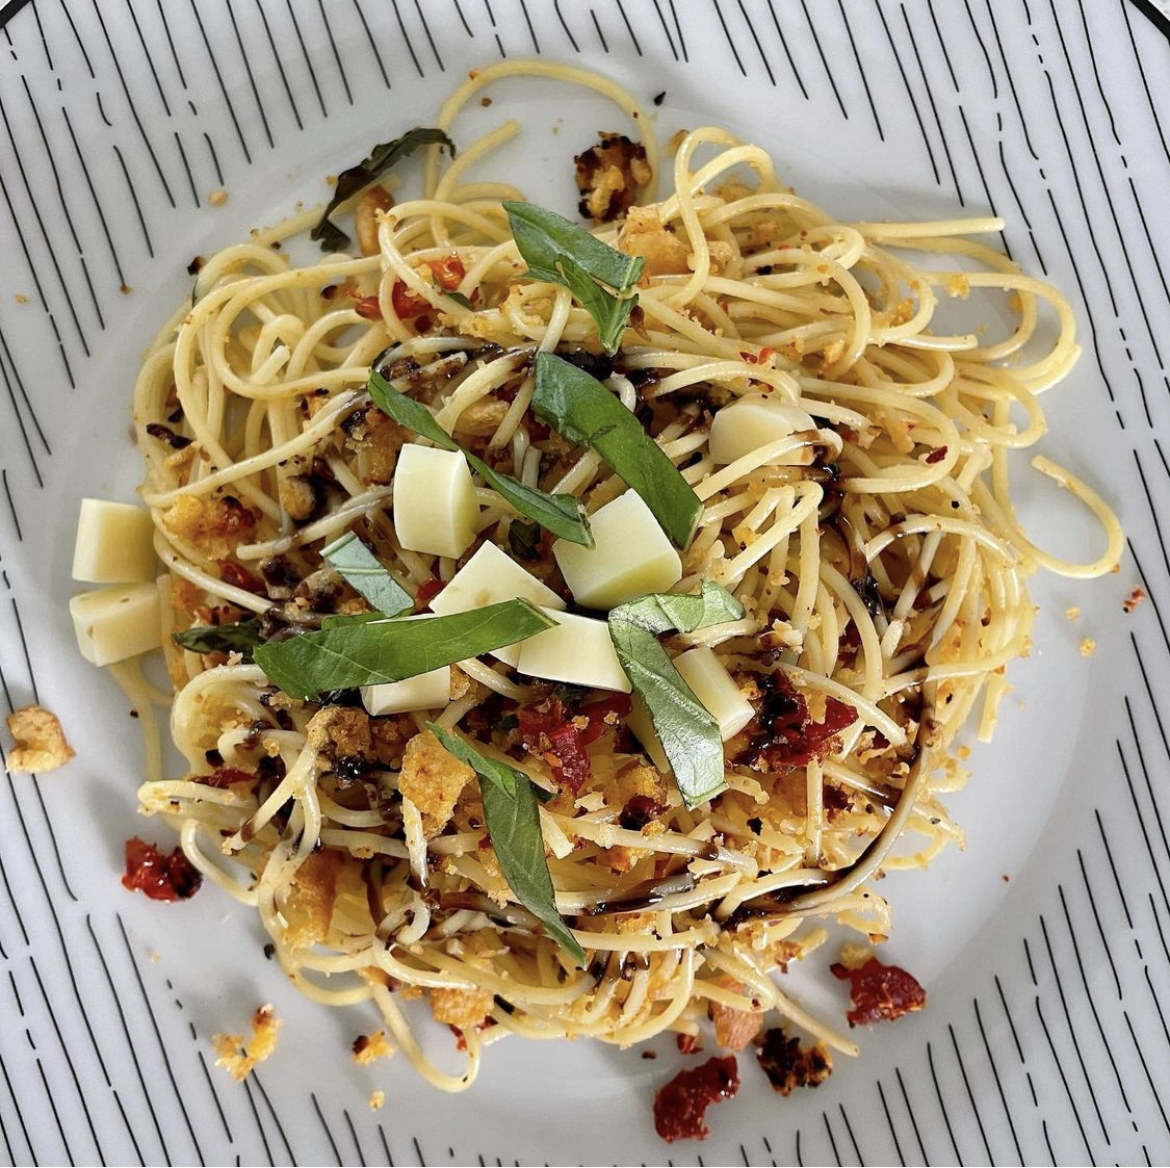 Rustic Summer Pasta with Sundried Tomatoes